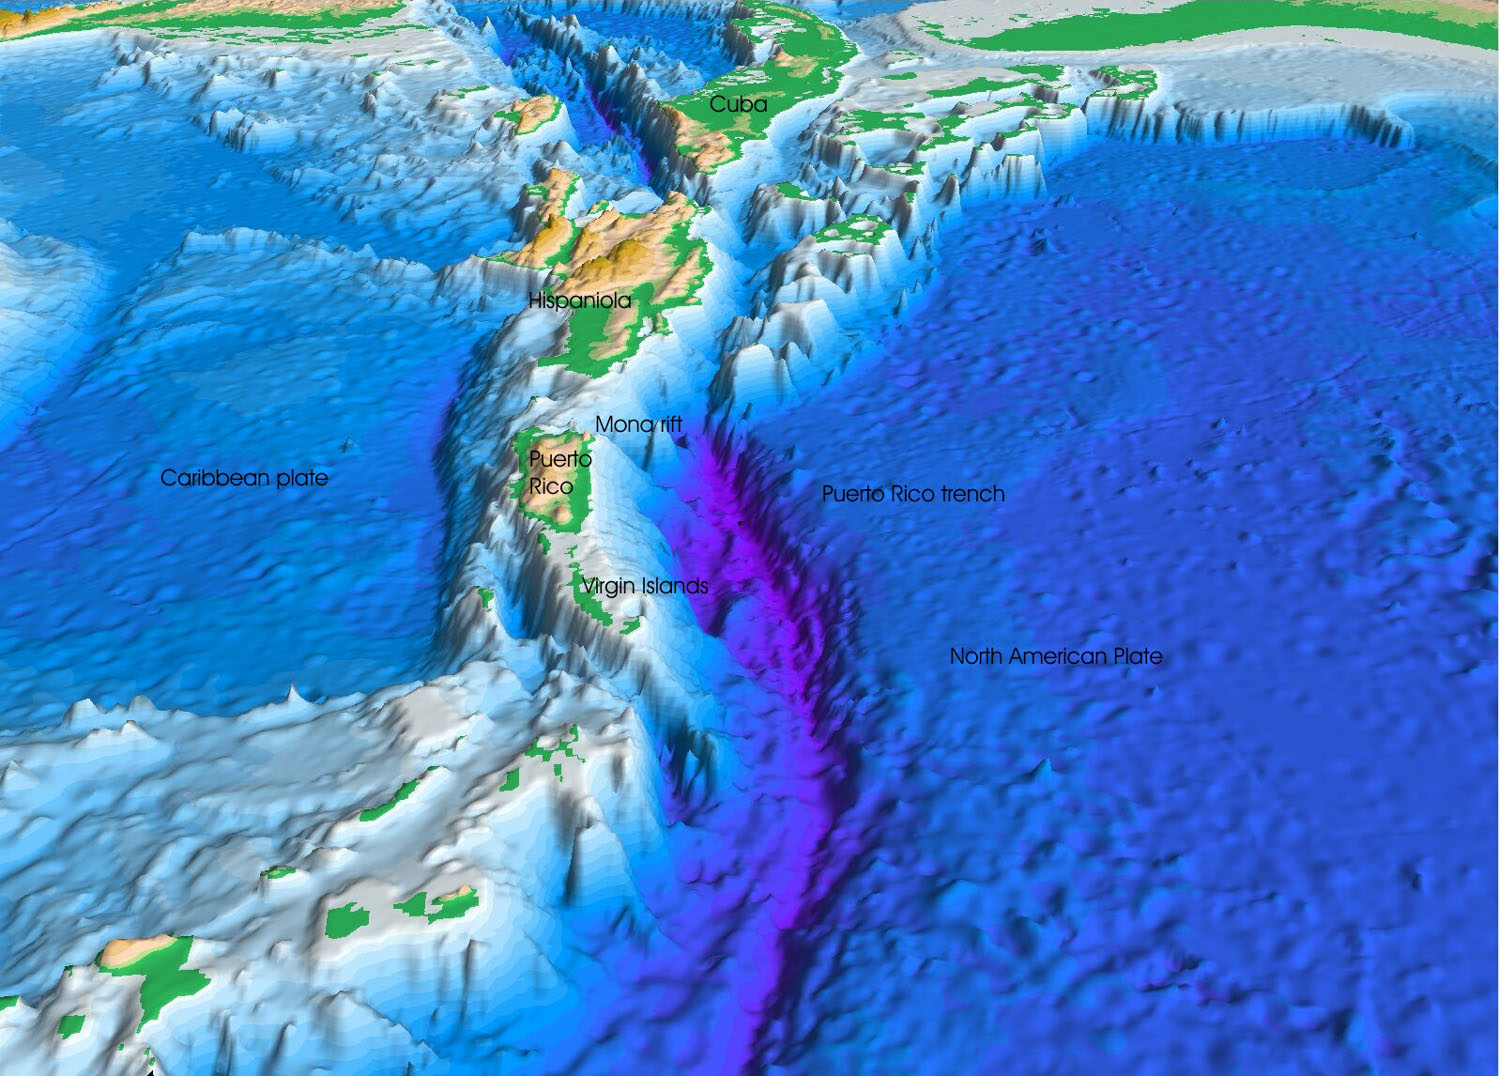 Perspective view of the sea floor of the Atlantic Ocean and the Caribbean Sea. The Lesser Antilles are on the lower left side of the view and Florida is on the upper right. The purple sea floor at the center of the view is the Puerto Rico trench, the deepest part of the Atlantic Ocean and the Caribbean Sea.